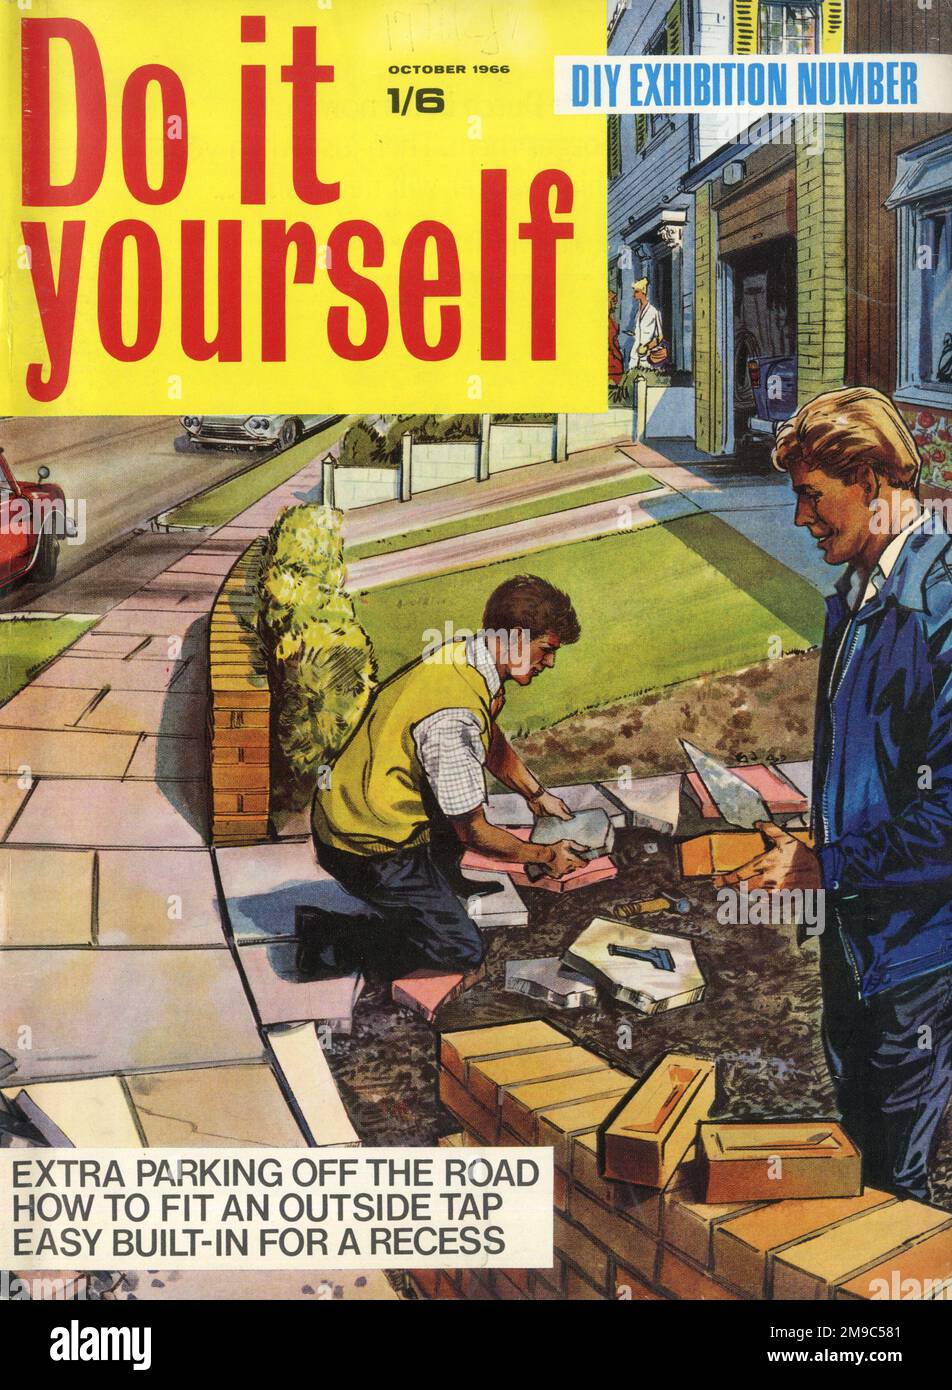 Cover design, Do it yourself, October 1966 - extra parking off the road Stock Photo